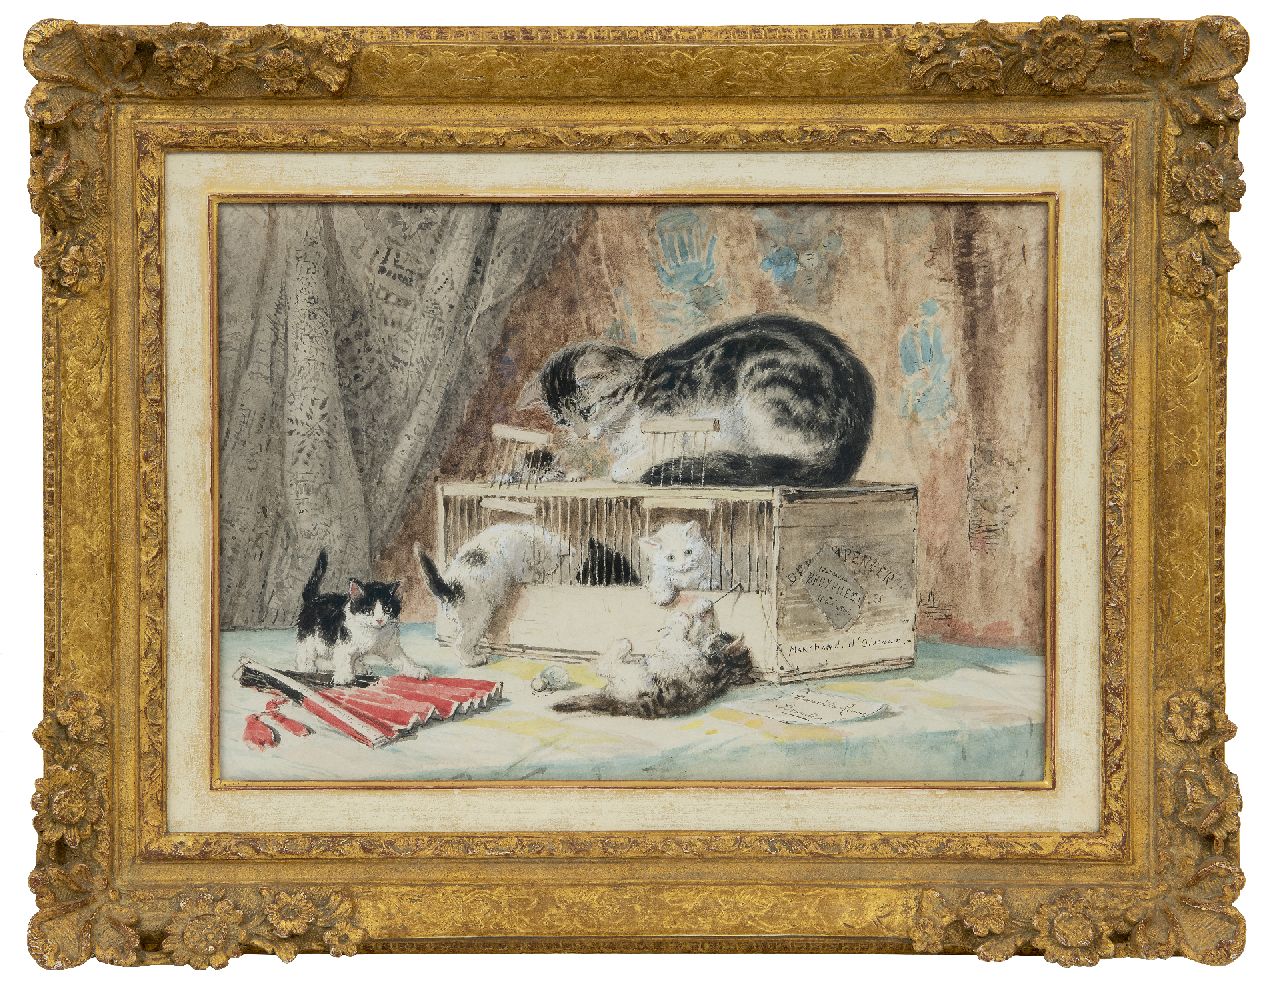 Ronner-Knip H.  | Henriette Ronner-Knip | Watercolours and drawings offered for sale | A cat and kittens playing with a birds cage, watercolour on paper 30.0 x 55.0 cm, signed l.r.